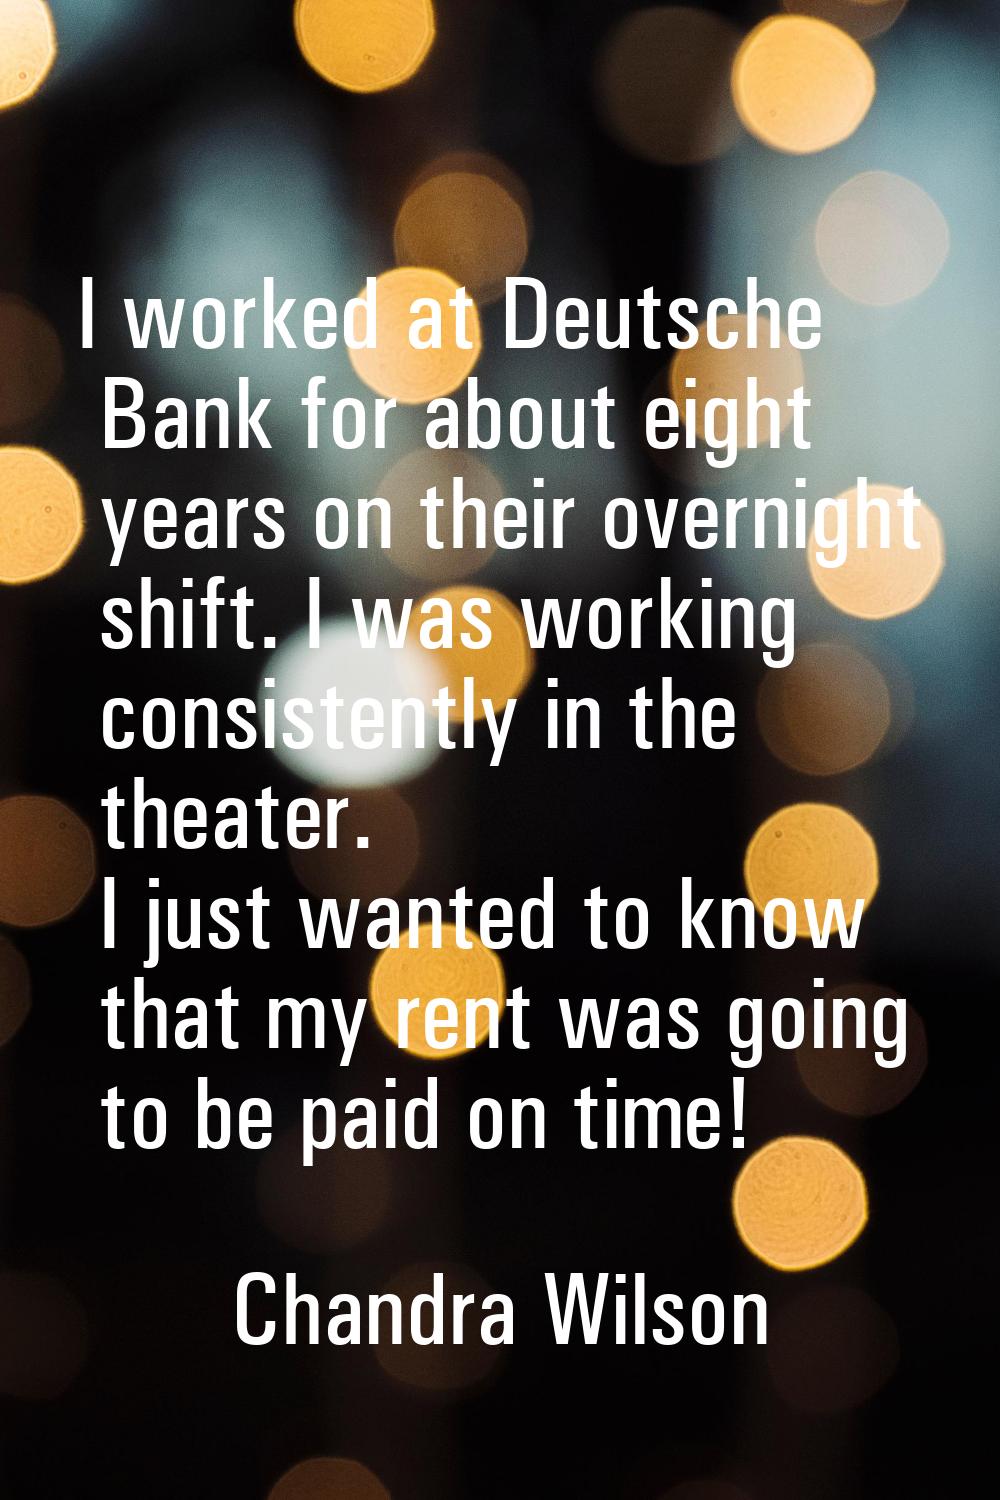 I worked at Deutsche Bank for about eight years on their overnight shift. I was working consistentl